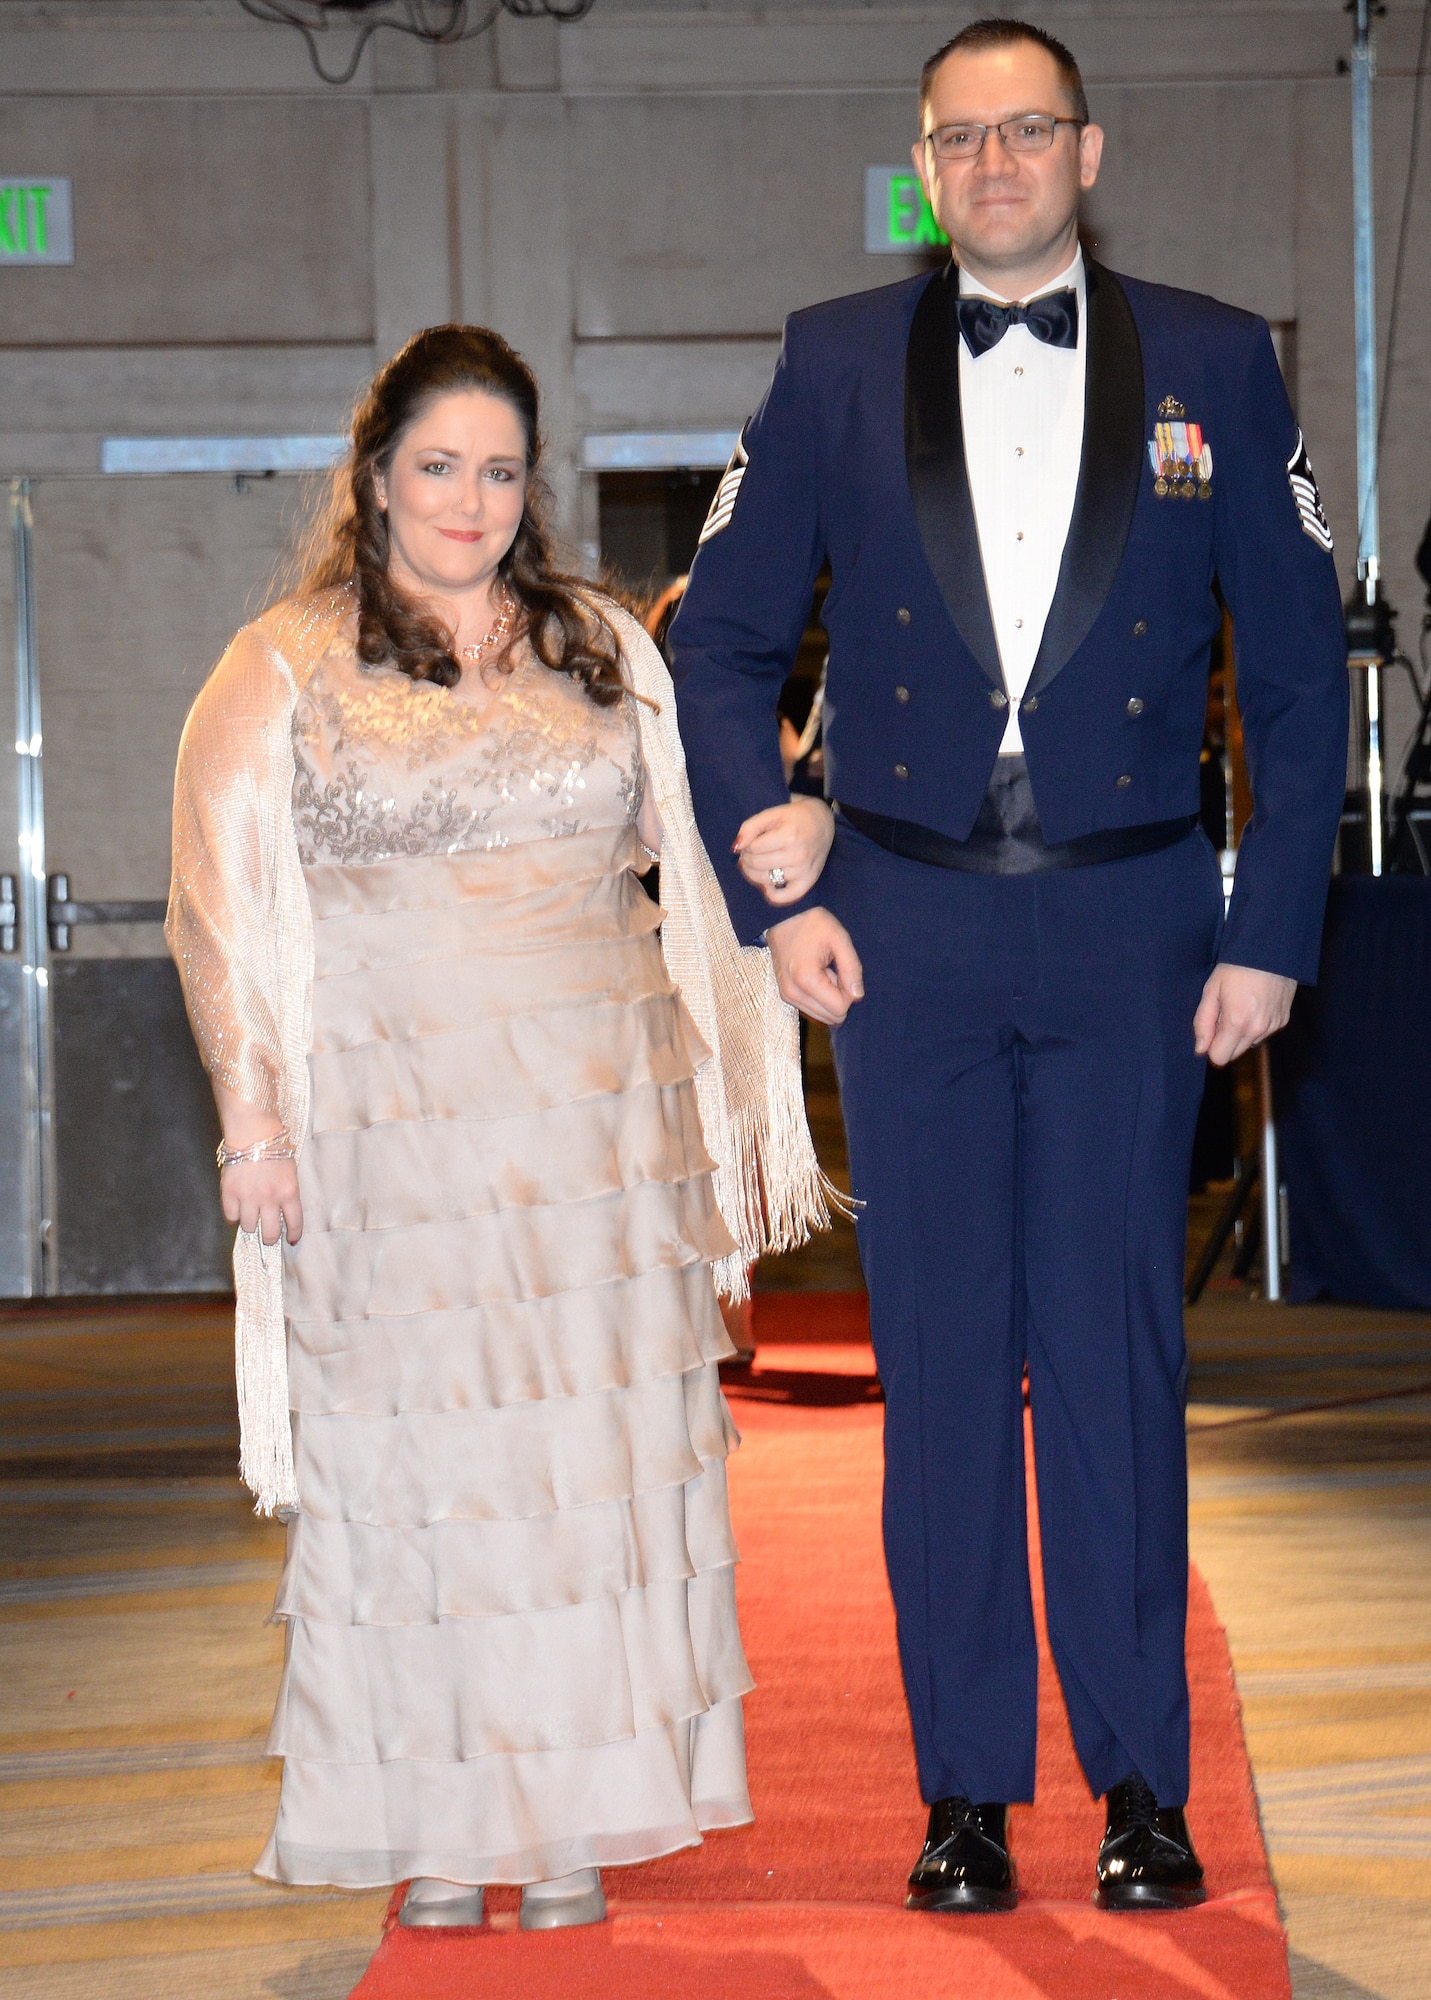 146th Airlift Wing's Master Sgt. Joshua Baker and his wife Kelly walk the red carpet at the 2017 Outstanding soldier/Airman of the Year Banquet. Baker took the prize in the state's First Sergeant category. (U.S. ANG photo by: Staff Sgt. Kim Ramirez)